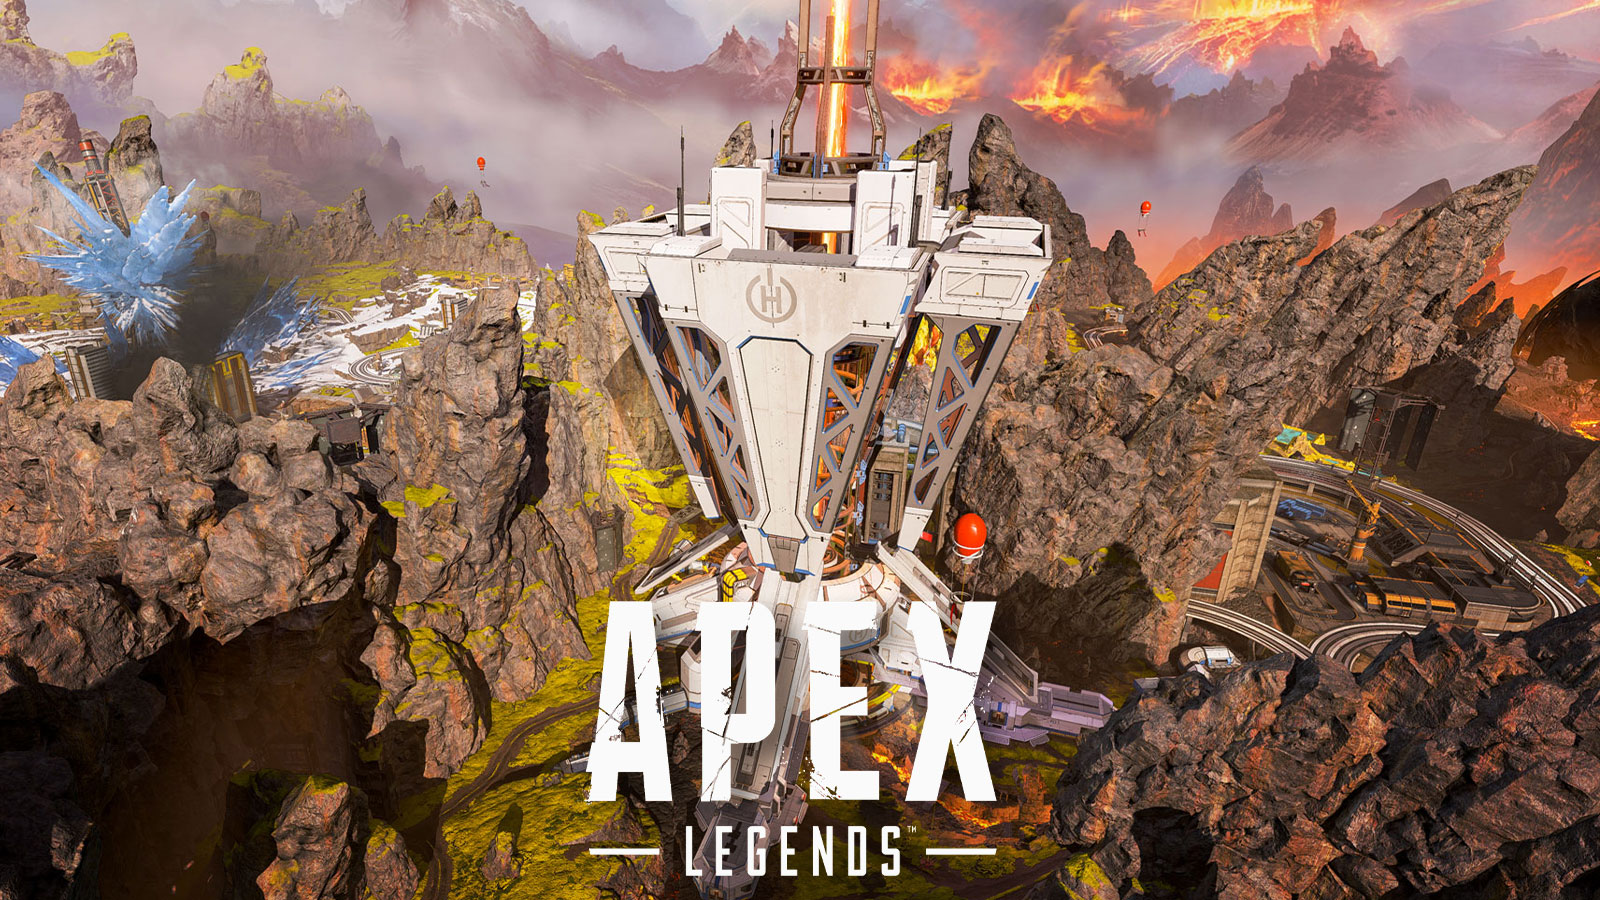 When is World's Edge coming back to Apex Legends? - Dexerto